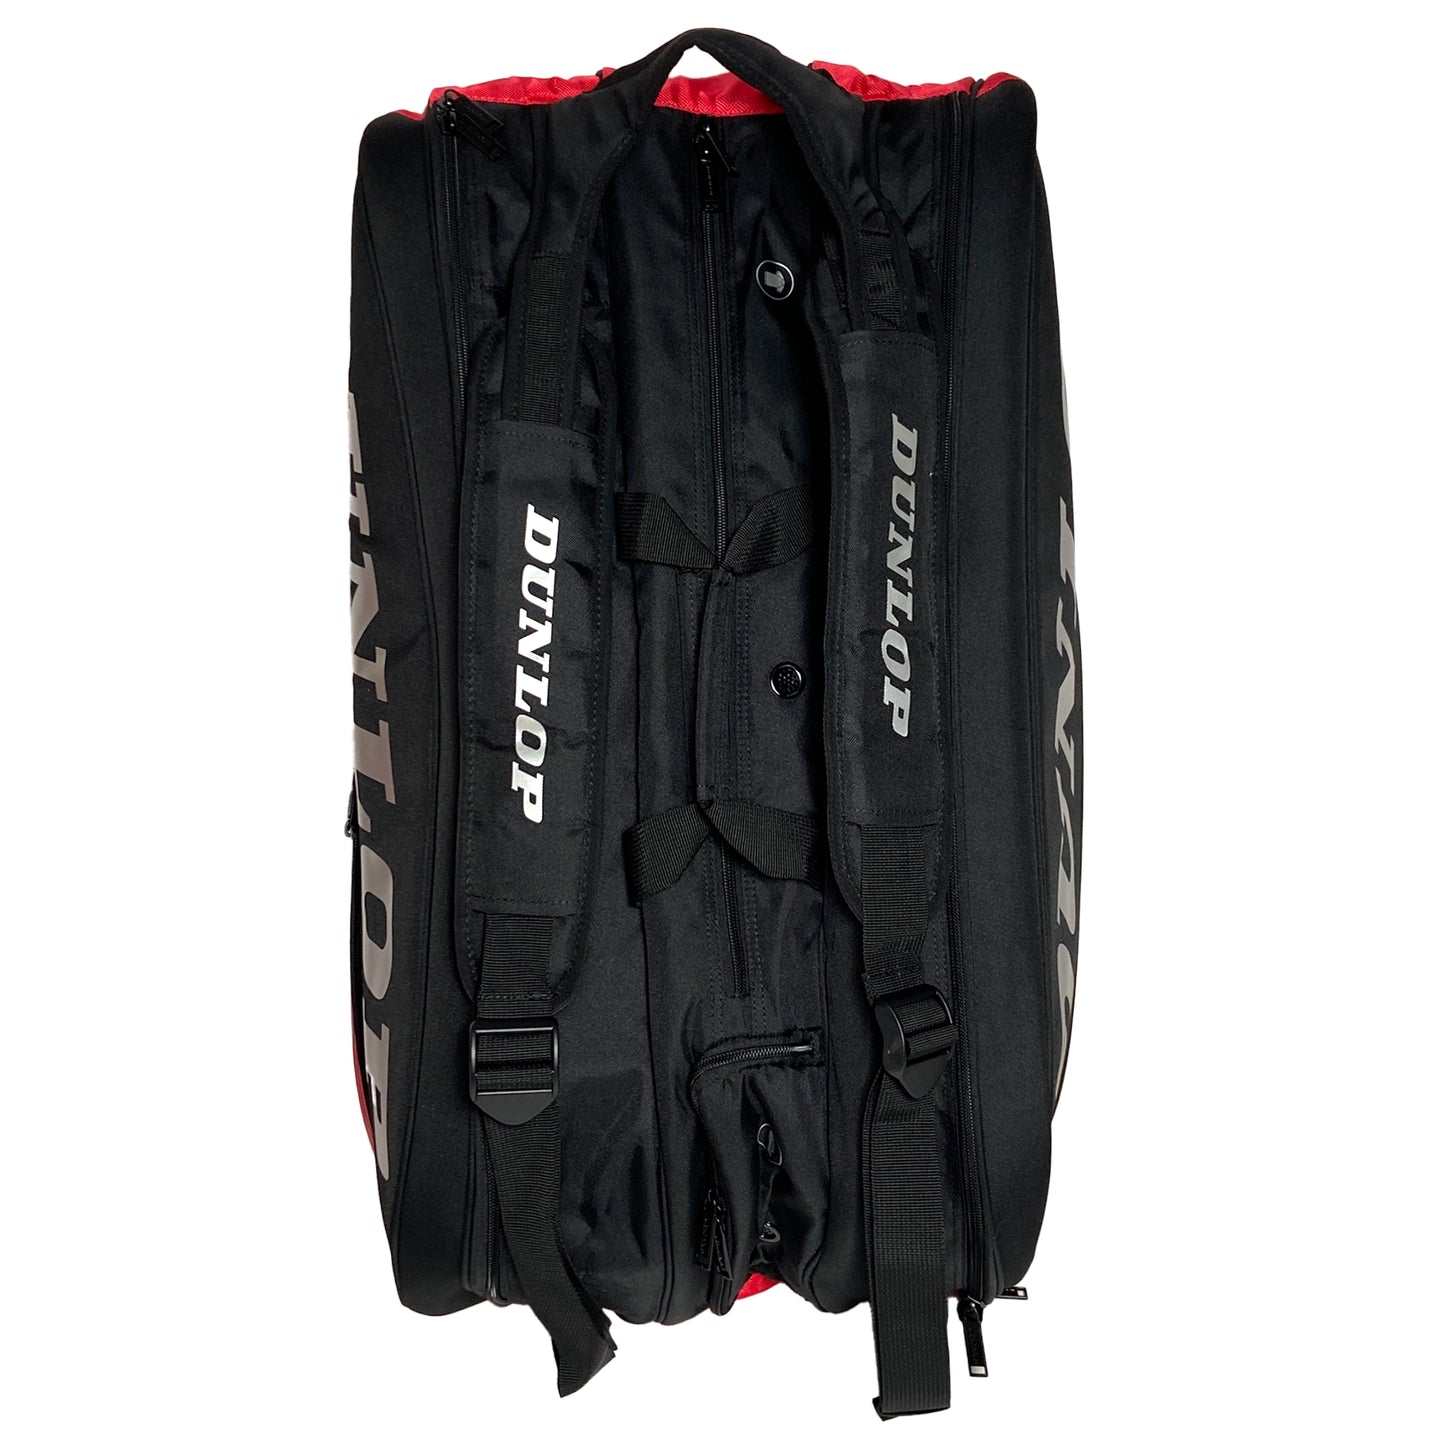 Dunlop CX Performance Thermo 8R Bag Black/Red